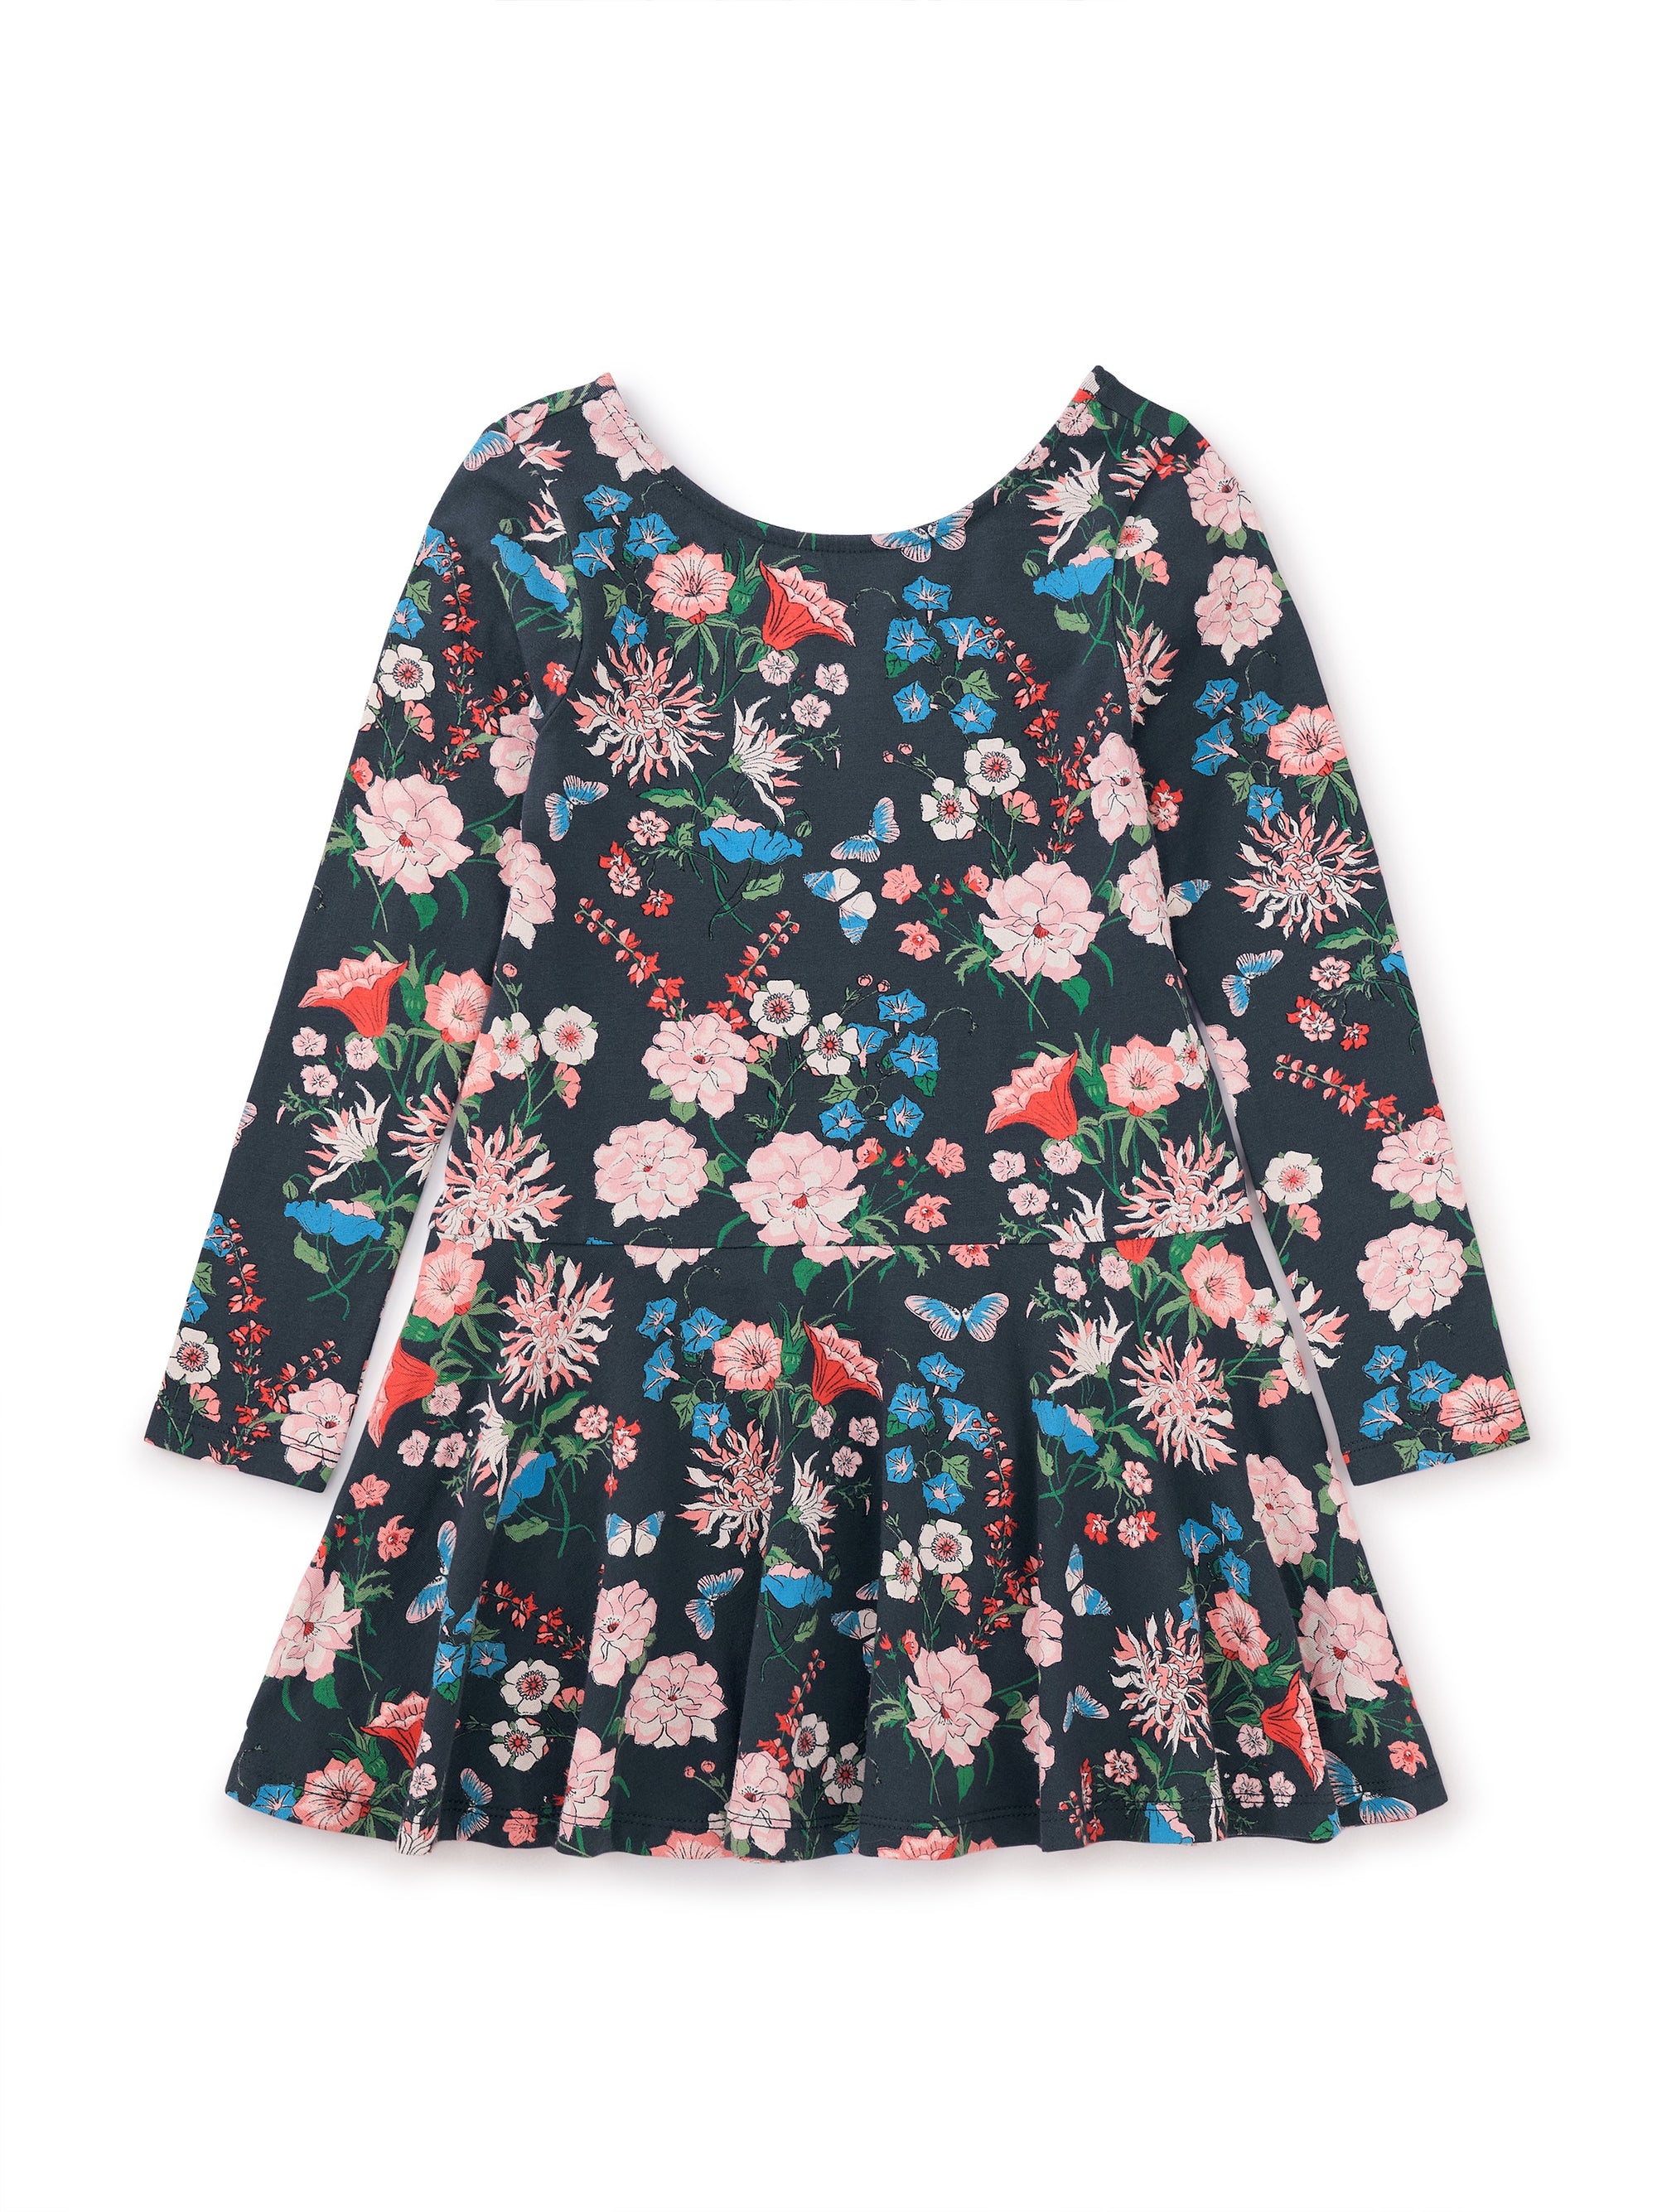 Long Sleeve Skater Baby Dress - Intricate Floral